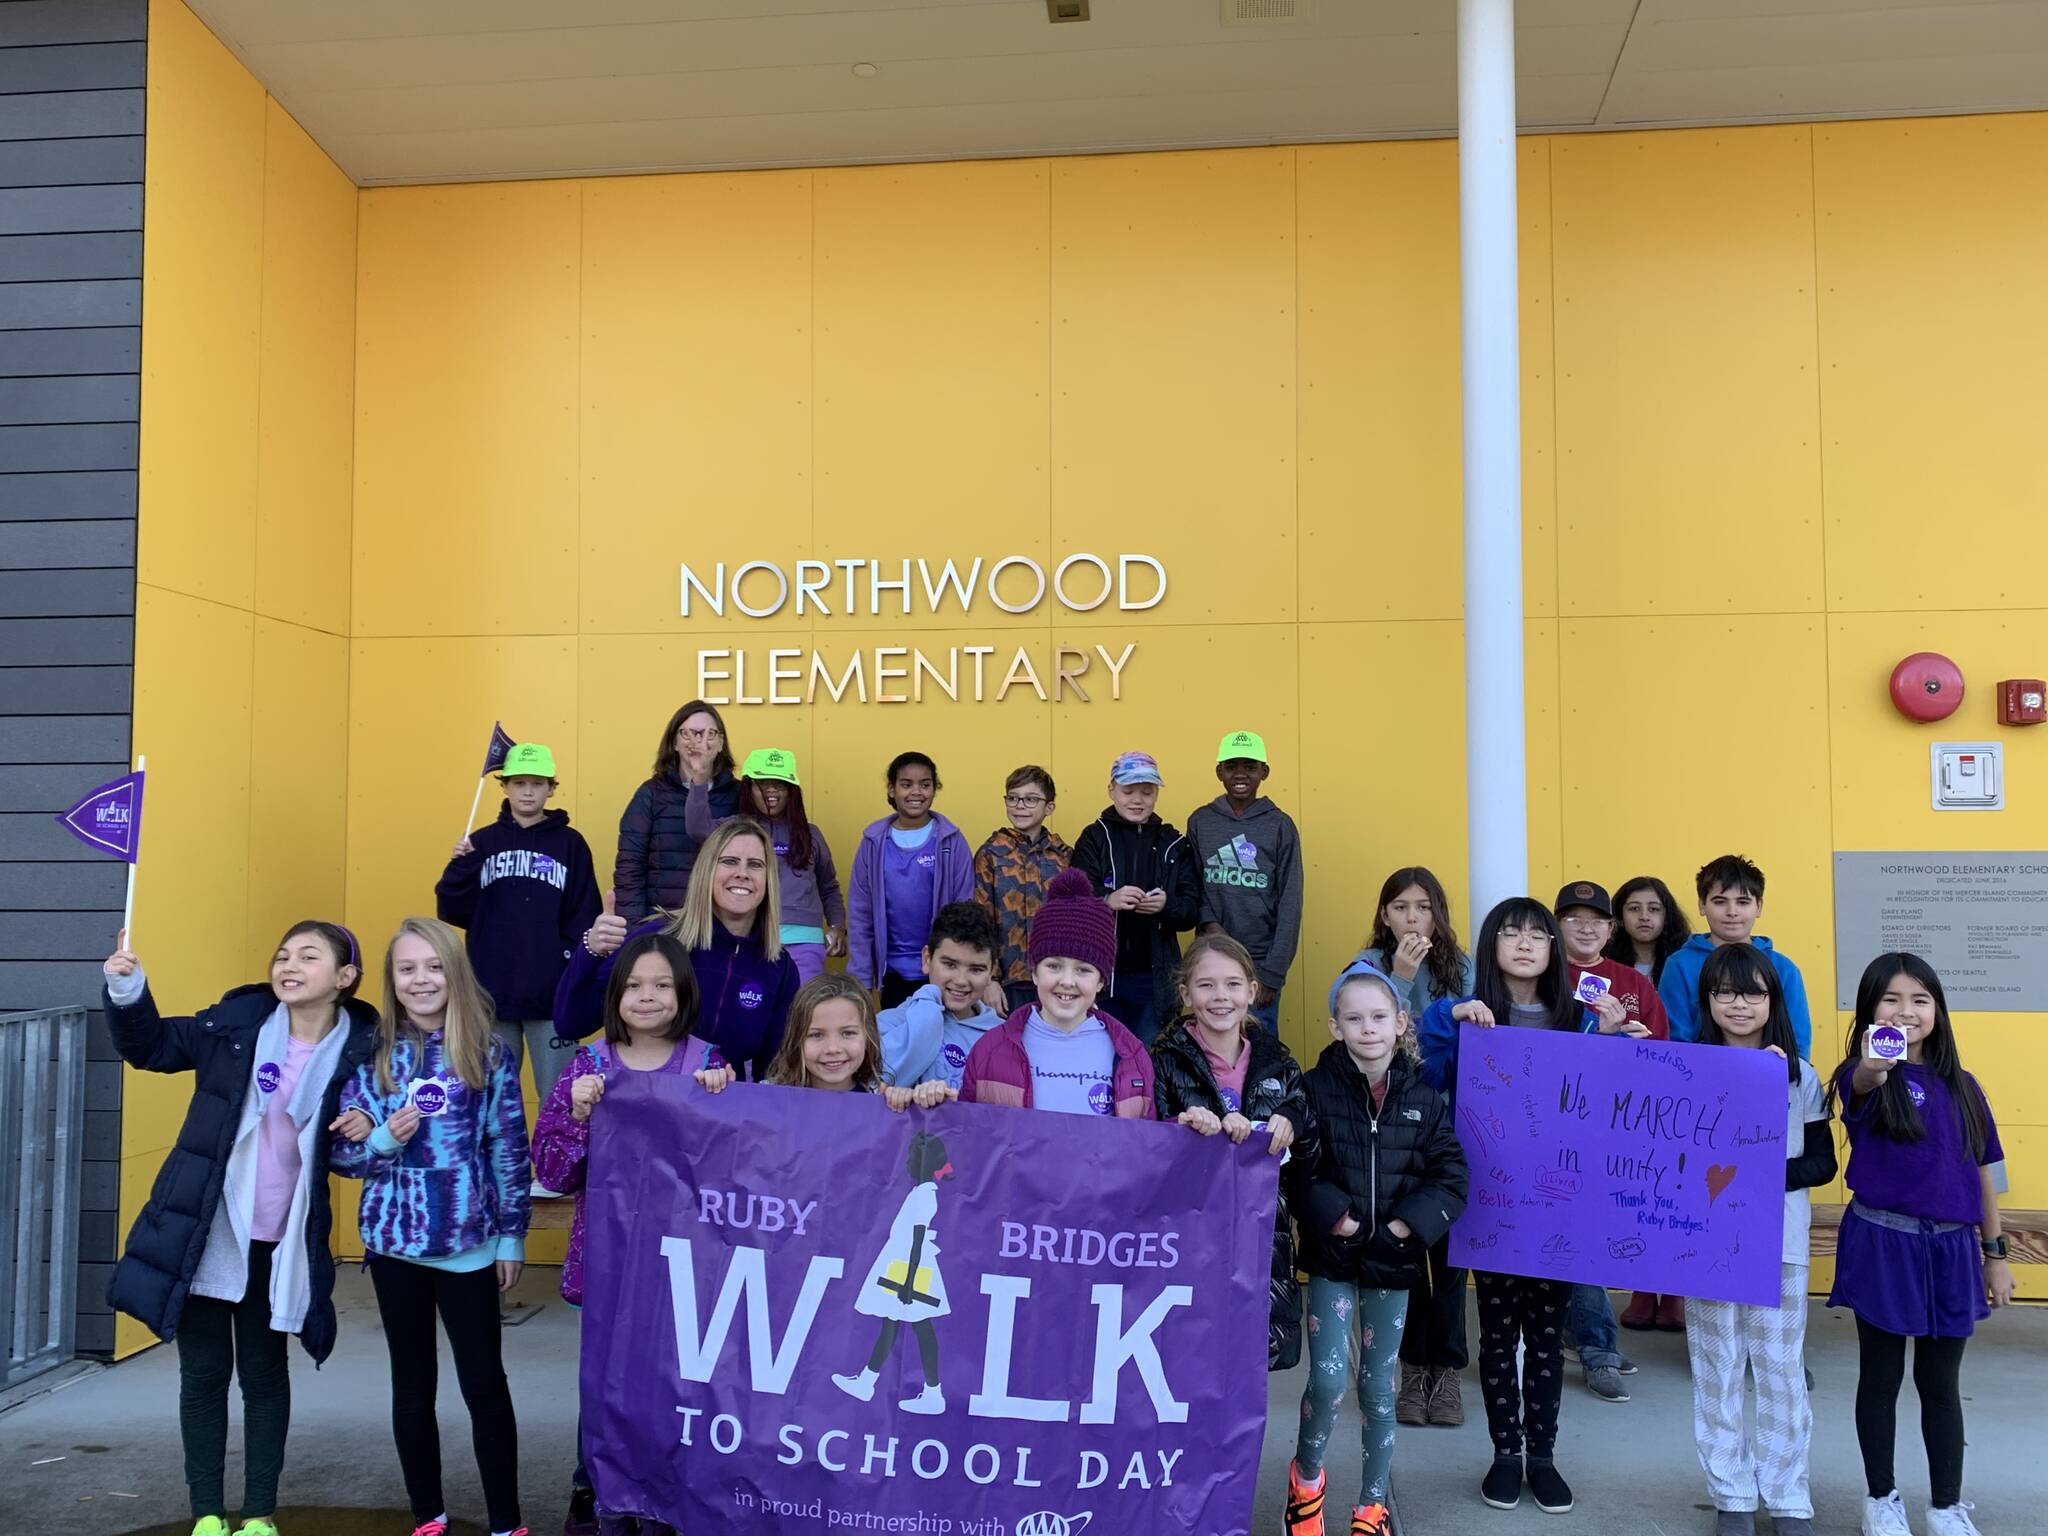 Northwood Elementary School teacher Lindsay Oliveira joins fourth- and fifth-graders on Ruby Bridges Walk to School Day on Nov. 14. Courtesy photo